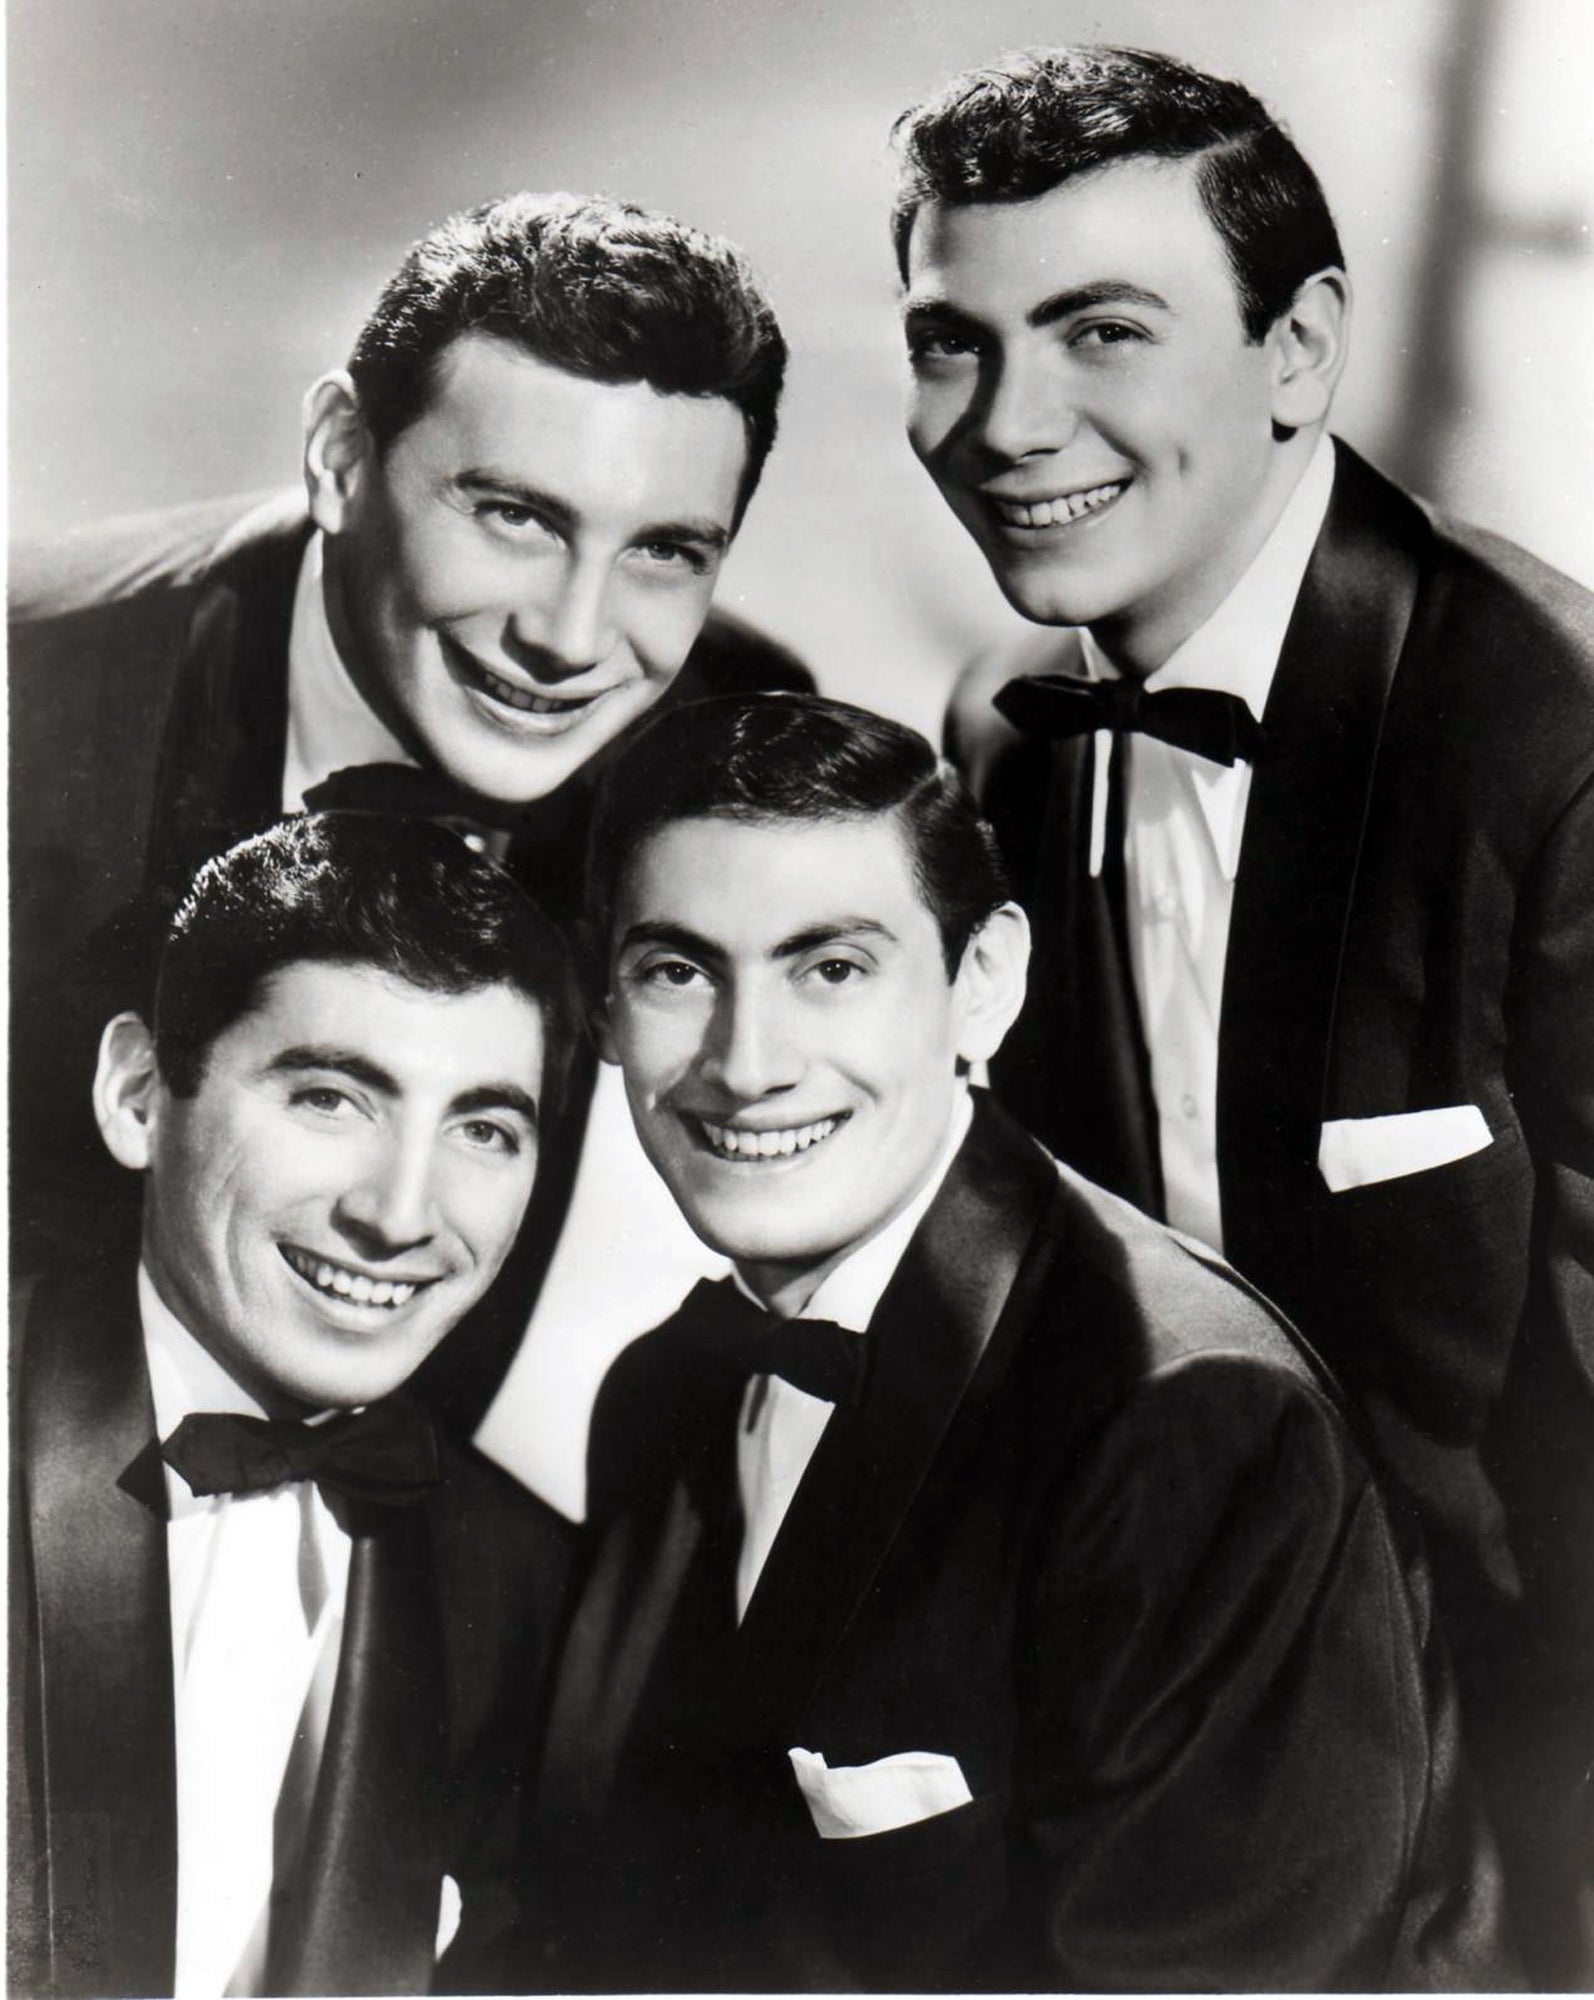 This image provided by Karen Mesterton-Gibbons shows The Ames brothers posing during an appearance for CBS Radio in the 1950s. Shown, from bottom left, Gene Ames; above left, Joe Ames; above right, Ed Ames; below right, Vic Ames.  